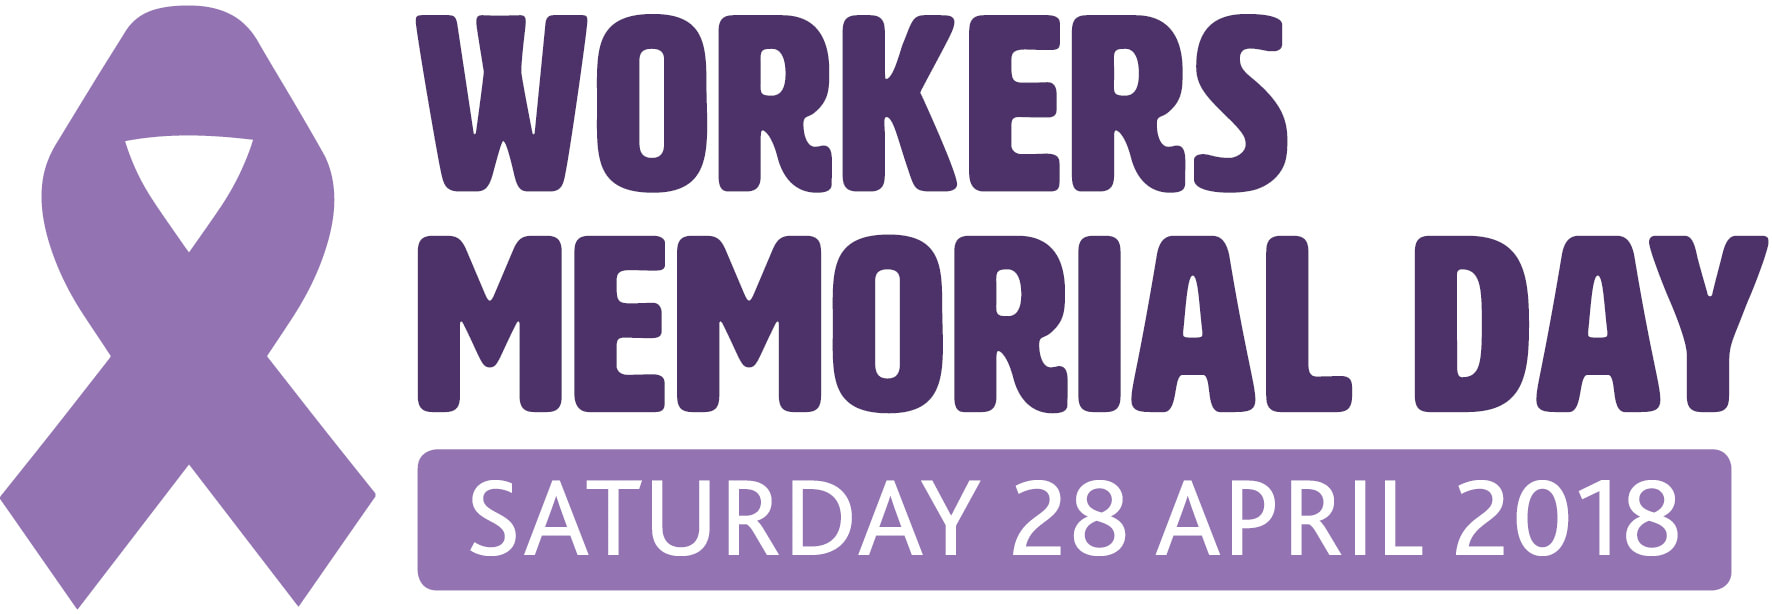 Corby Workers Memorial Day Commemoration Event 2018